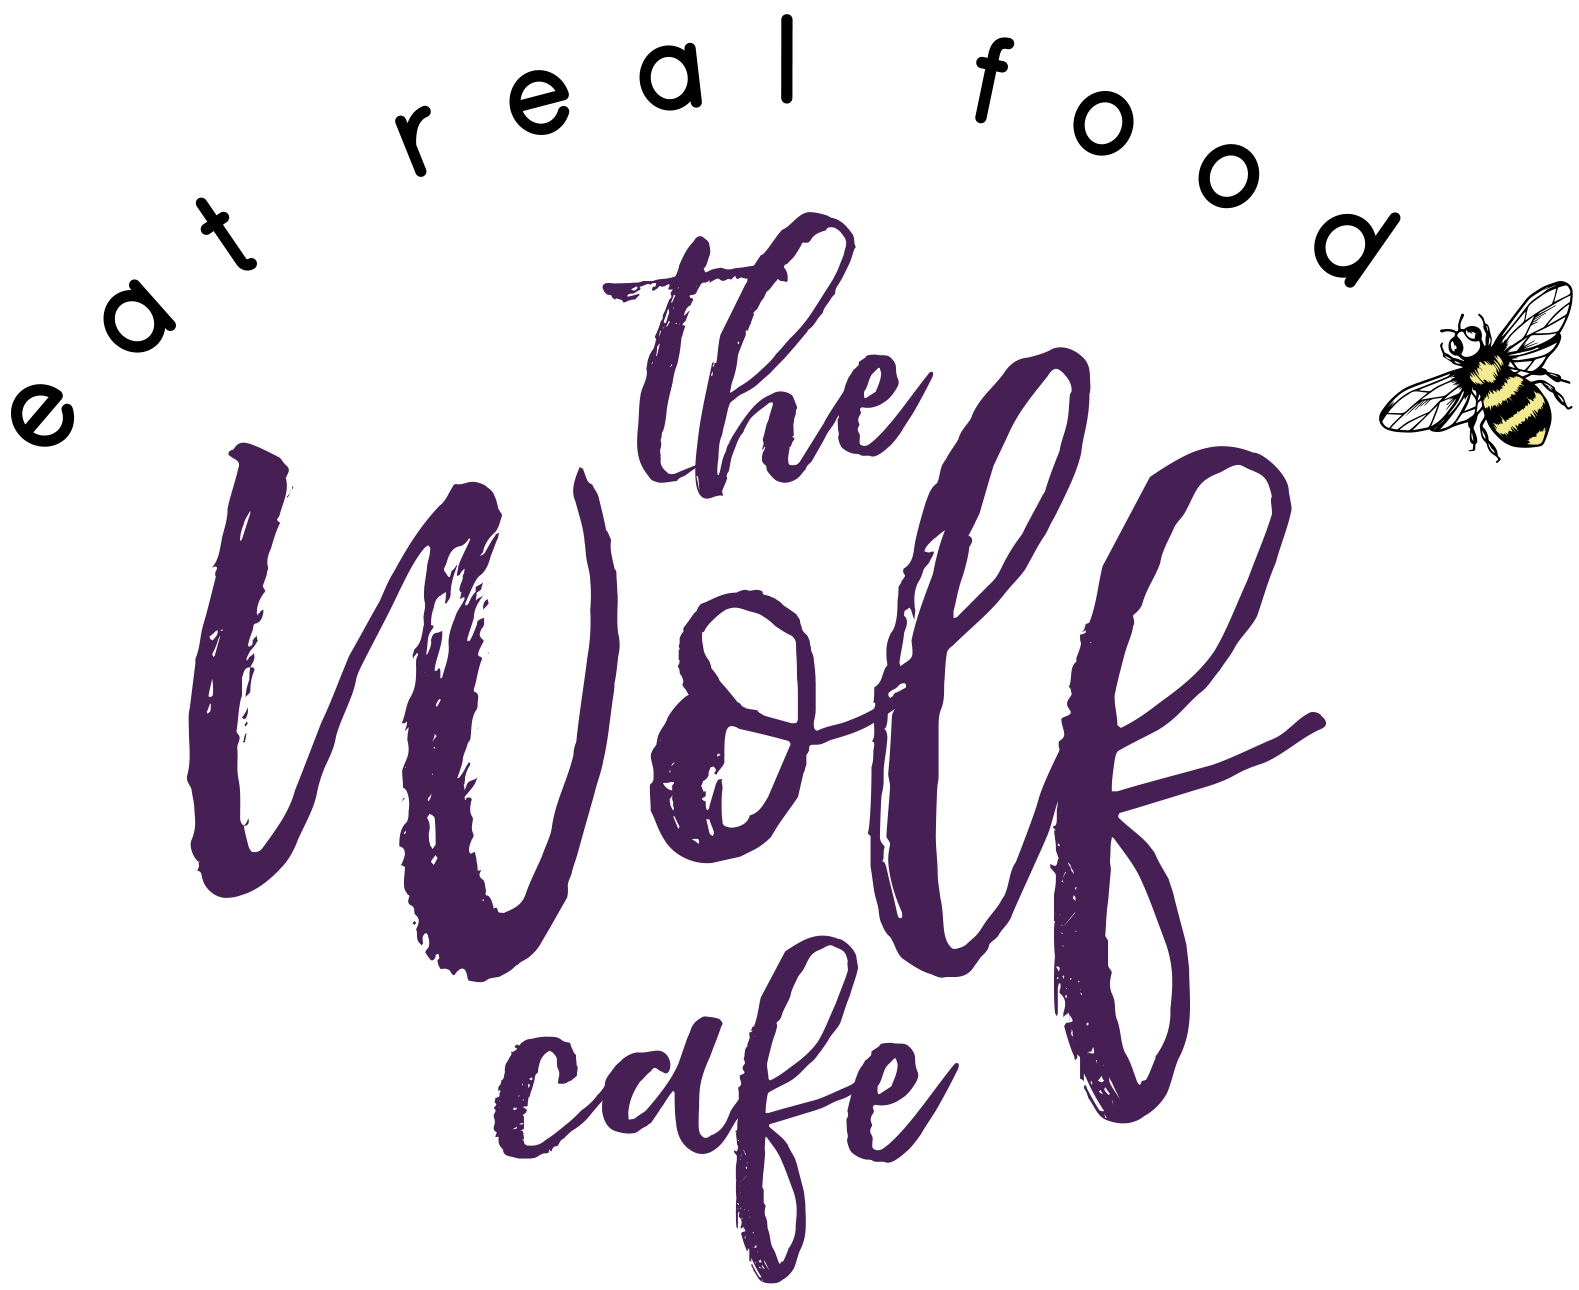 The Wolf Cafe and Live Music Restaurant Ballwin MO